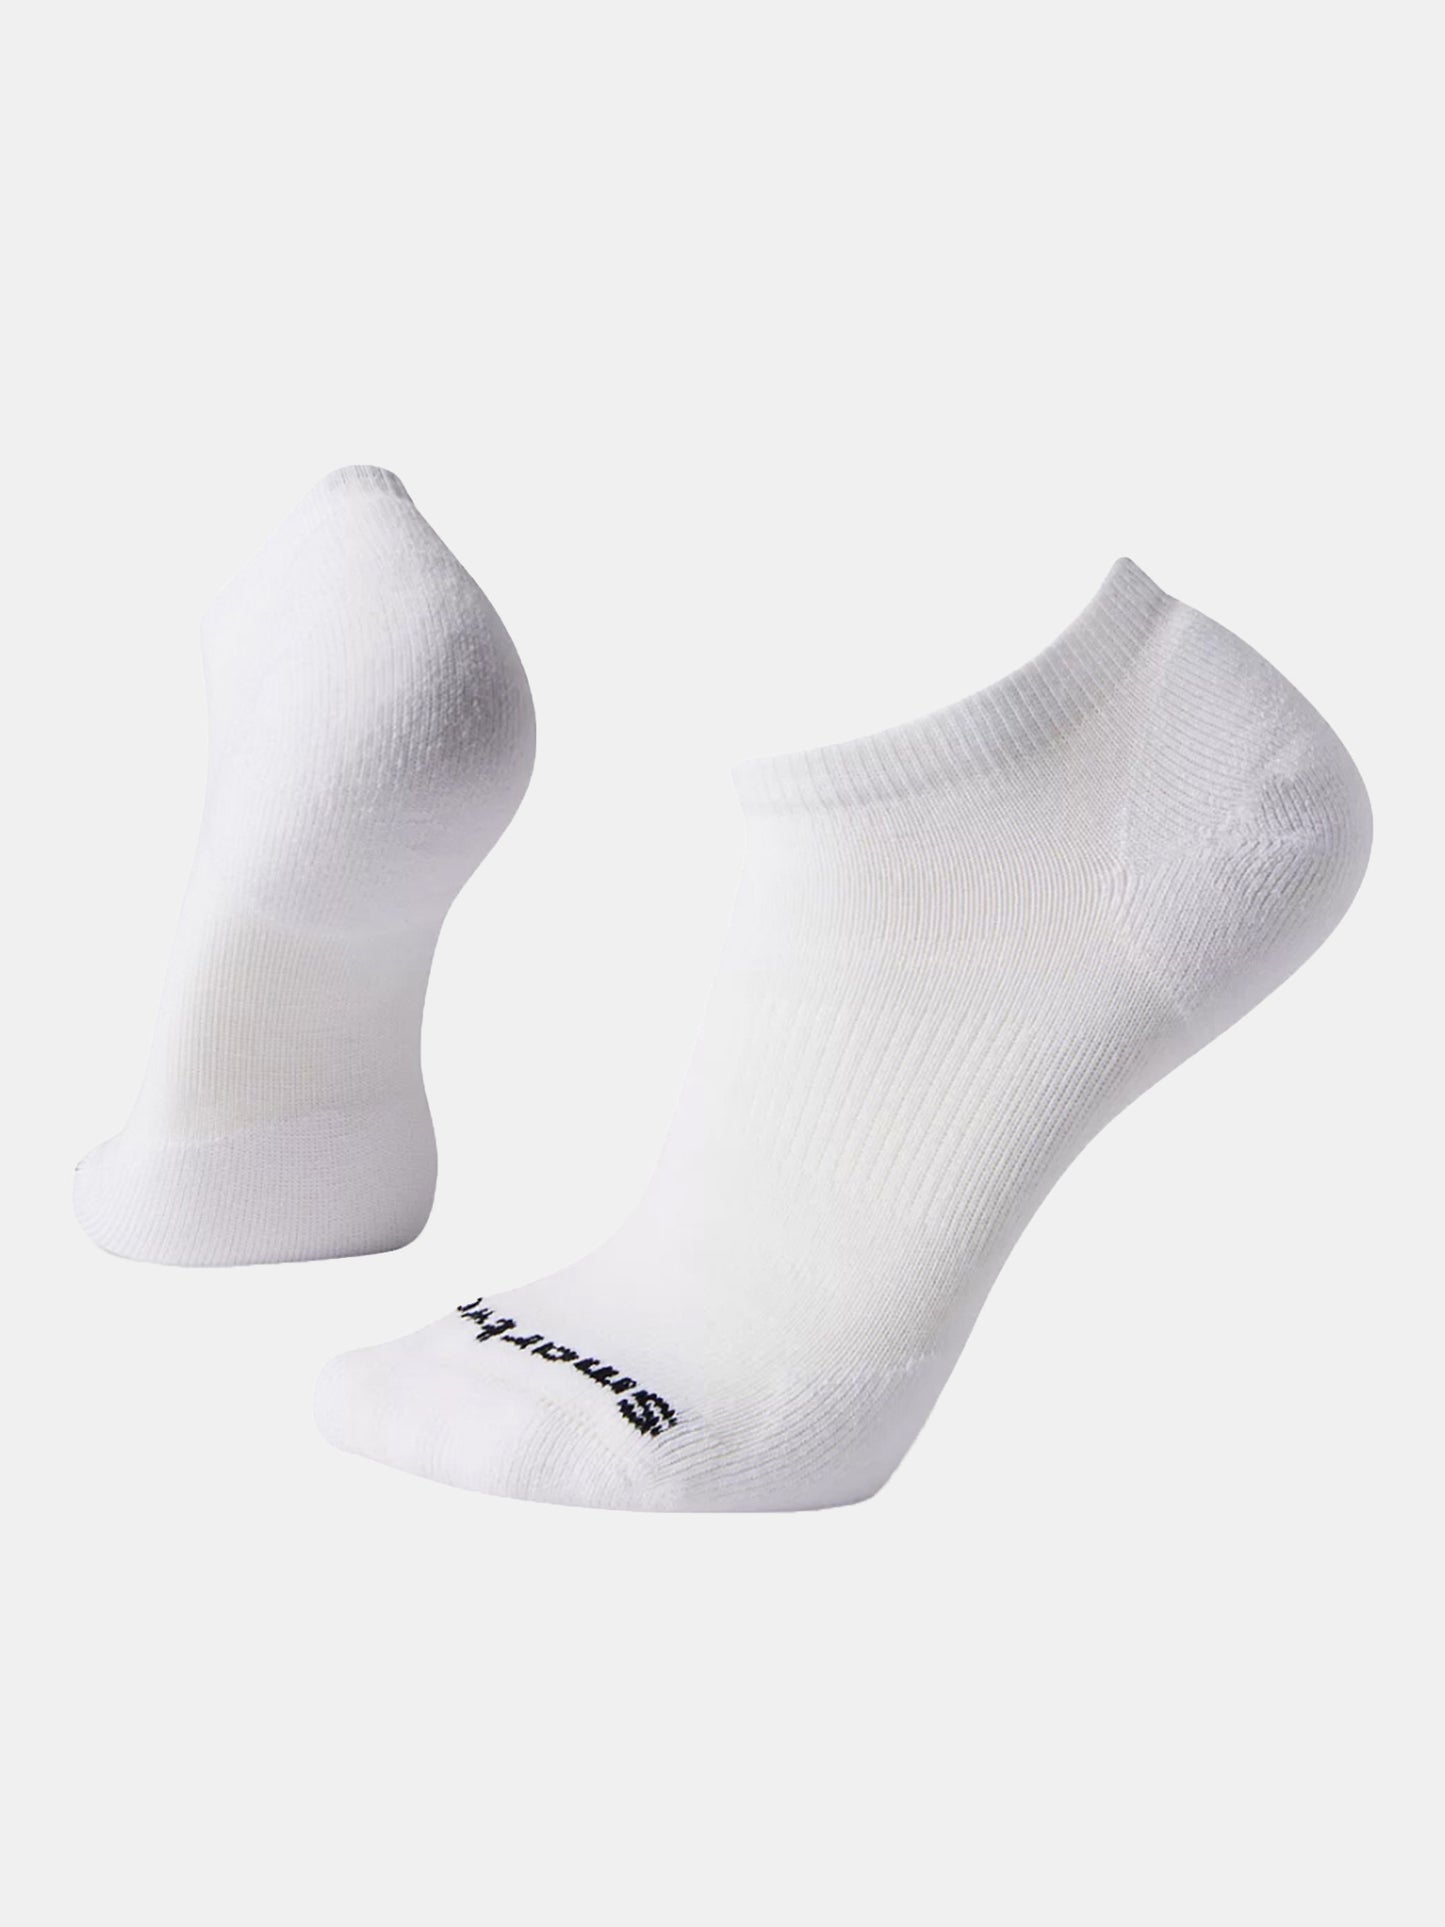 Smartwool Men's Athletic Targeted Cushion Low Ankle Sock